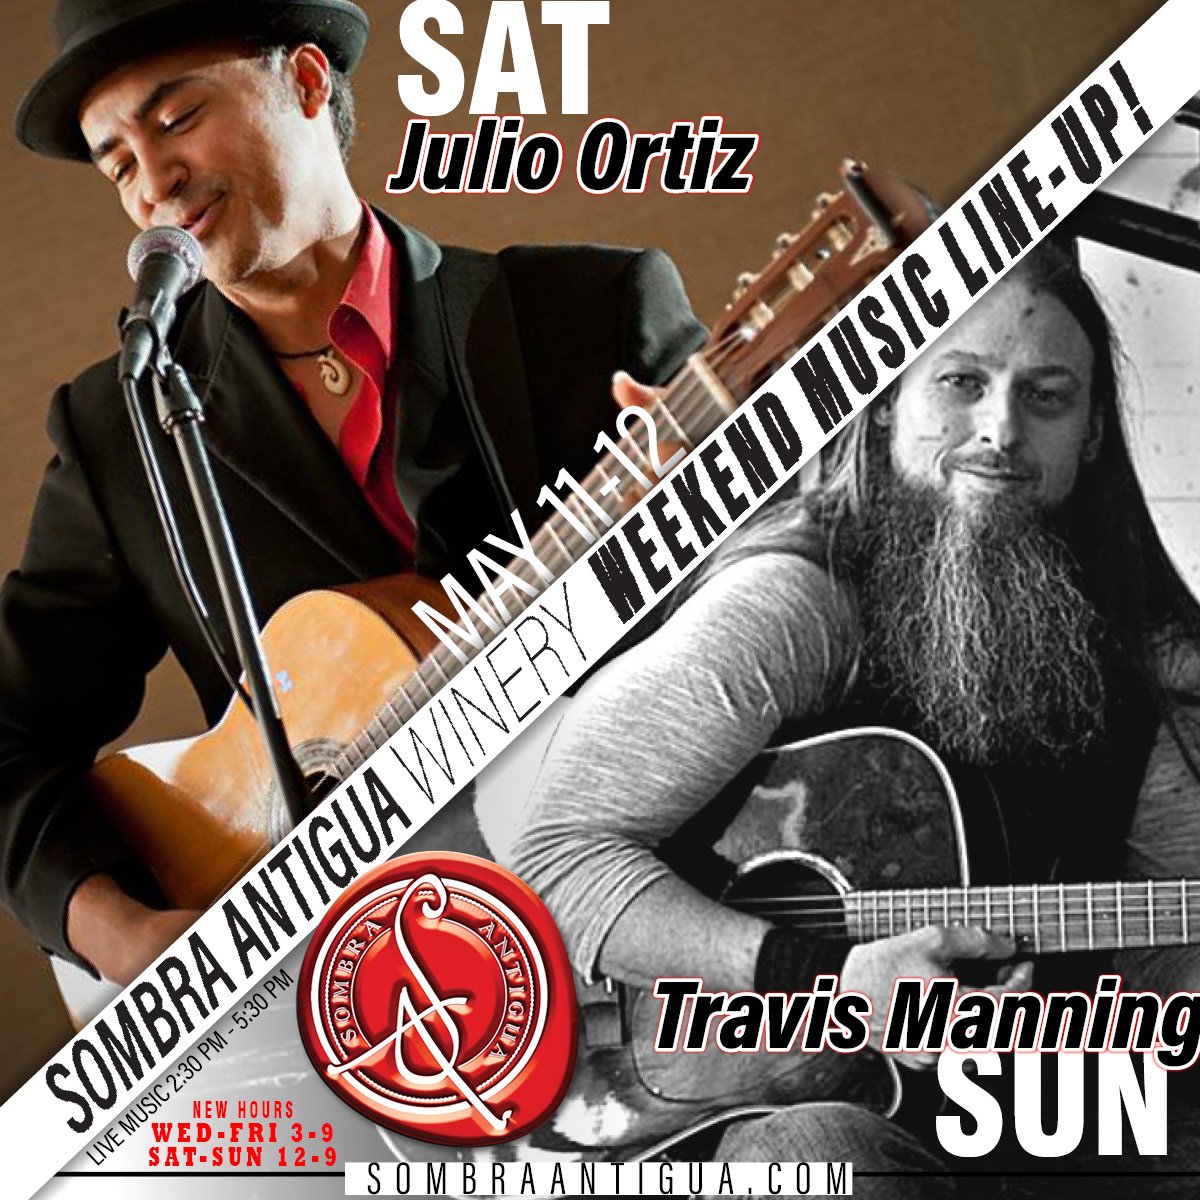 This weekend, we're about to be serenaded by some serious talent. Saturday, we've got Julio Ortiz - the man who makes the guitar weep. Then, Sunday, it's Travis Manning, the artist who can turn your Sunday blues into a groove!